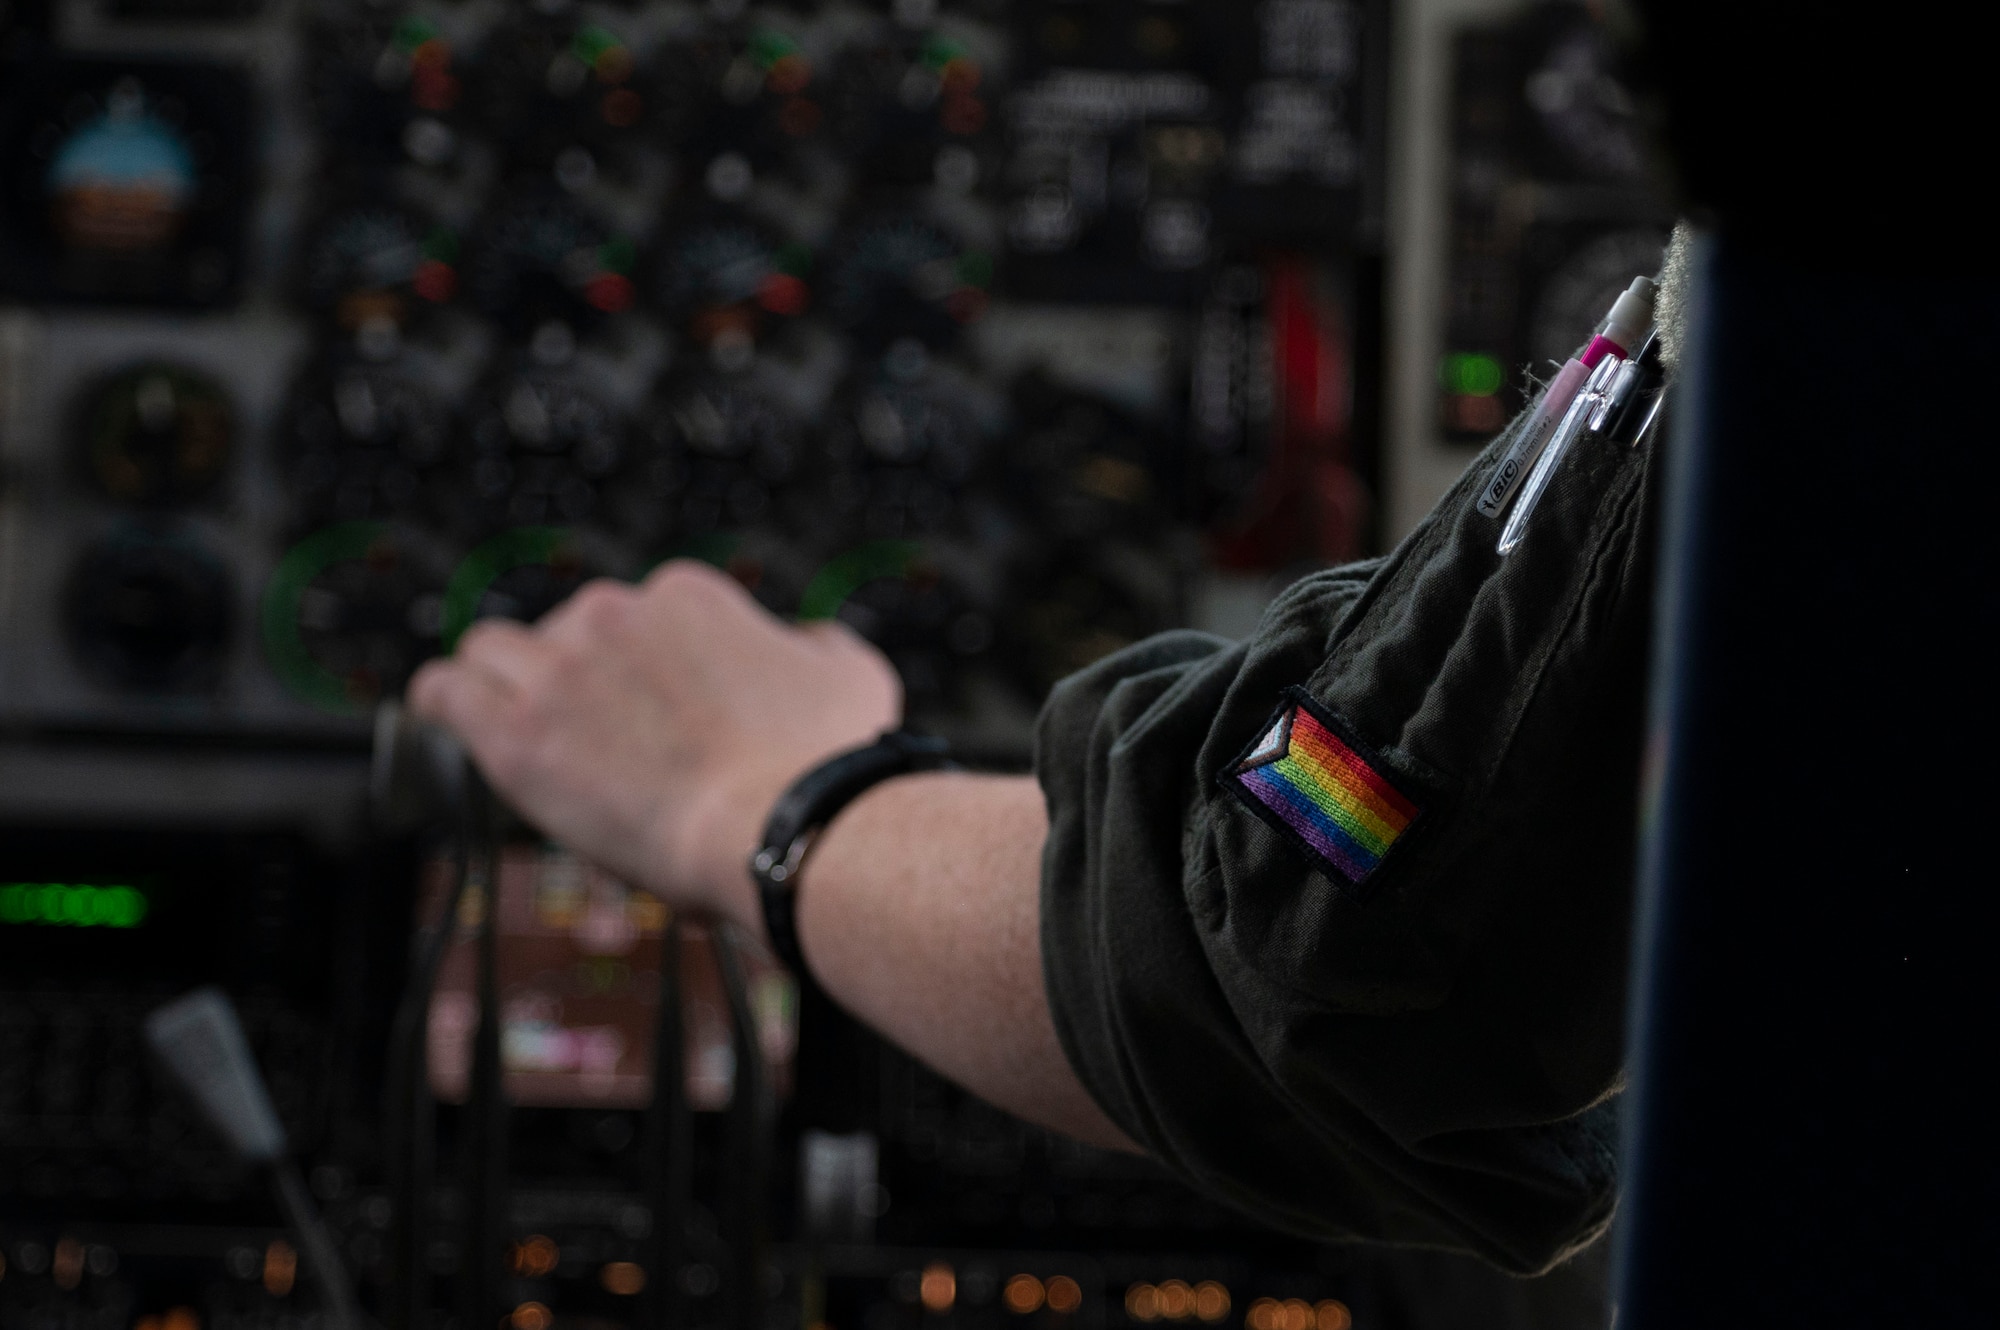 U.S. Air Force Capt. Madison Martin, a pilot assigned to the 97th Air Refueling Squadron, flies a KC-135 Stratotanker from Fairchild Air Force Base, Washington, June 22, 2023. Martin participated in a Pride flight that honors the diverse backgrounds and strengths that the lesbian, gay, bisexual, trans, queer, plus Airmen bring to the Fairchild mission. (U.S. Air Force photo by Airman 1st Class Lillian Patterson)